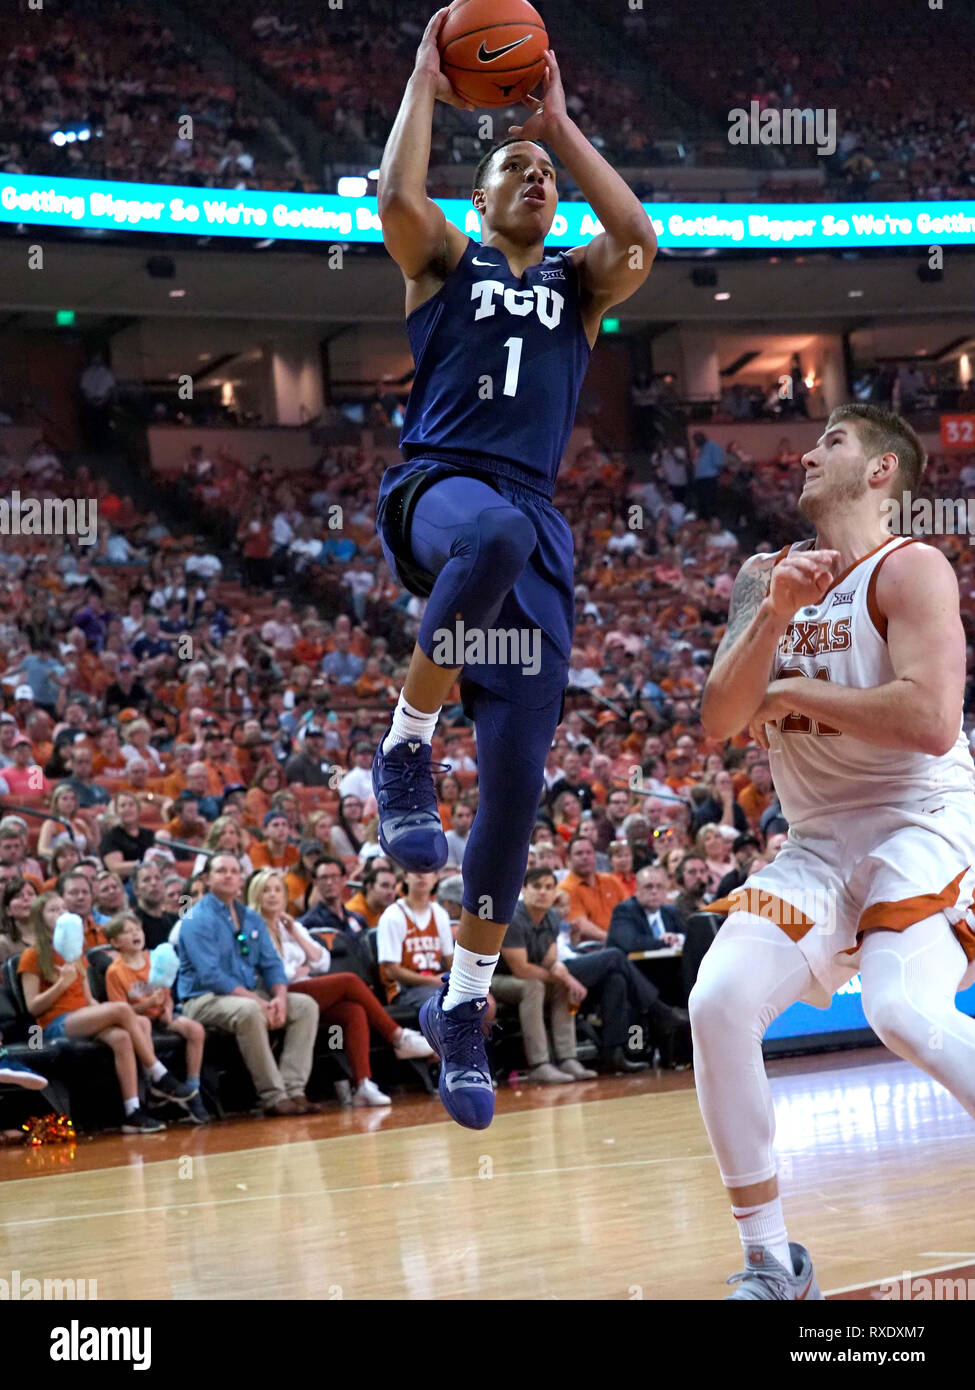 March 9, 2019. Desmond Bane #1 of the TCU Horned Frogs in action vs the Texas Longhorns at the Frank Erwin Center in Austin Texas. TCU beats Texas 69-54.Robert Backman/Cal Sport Media. Stock Photo